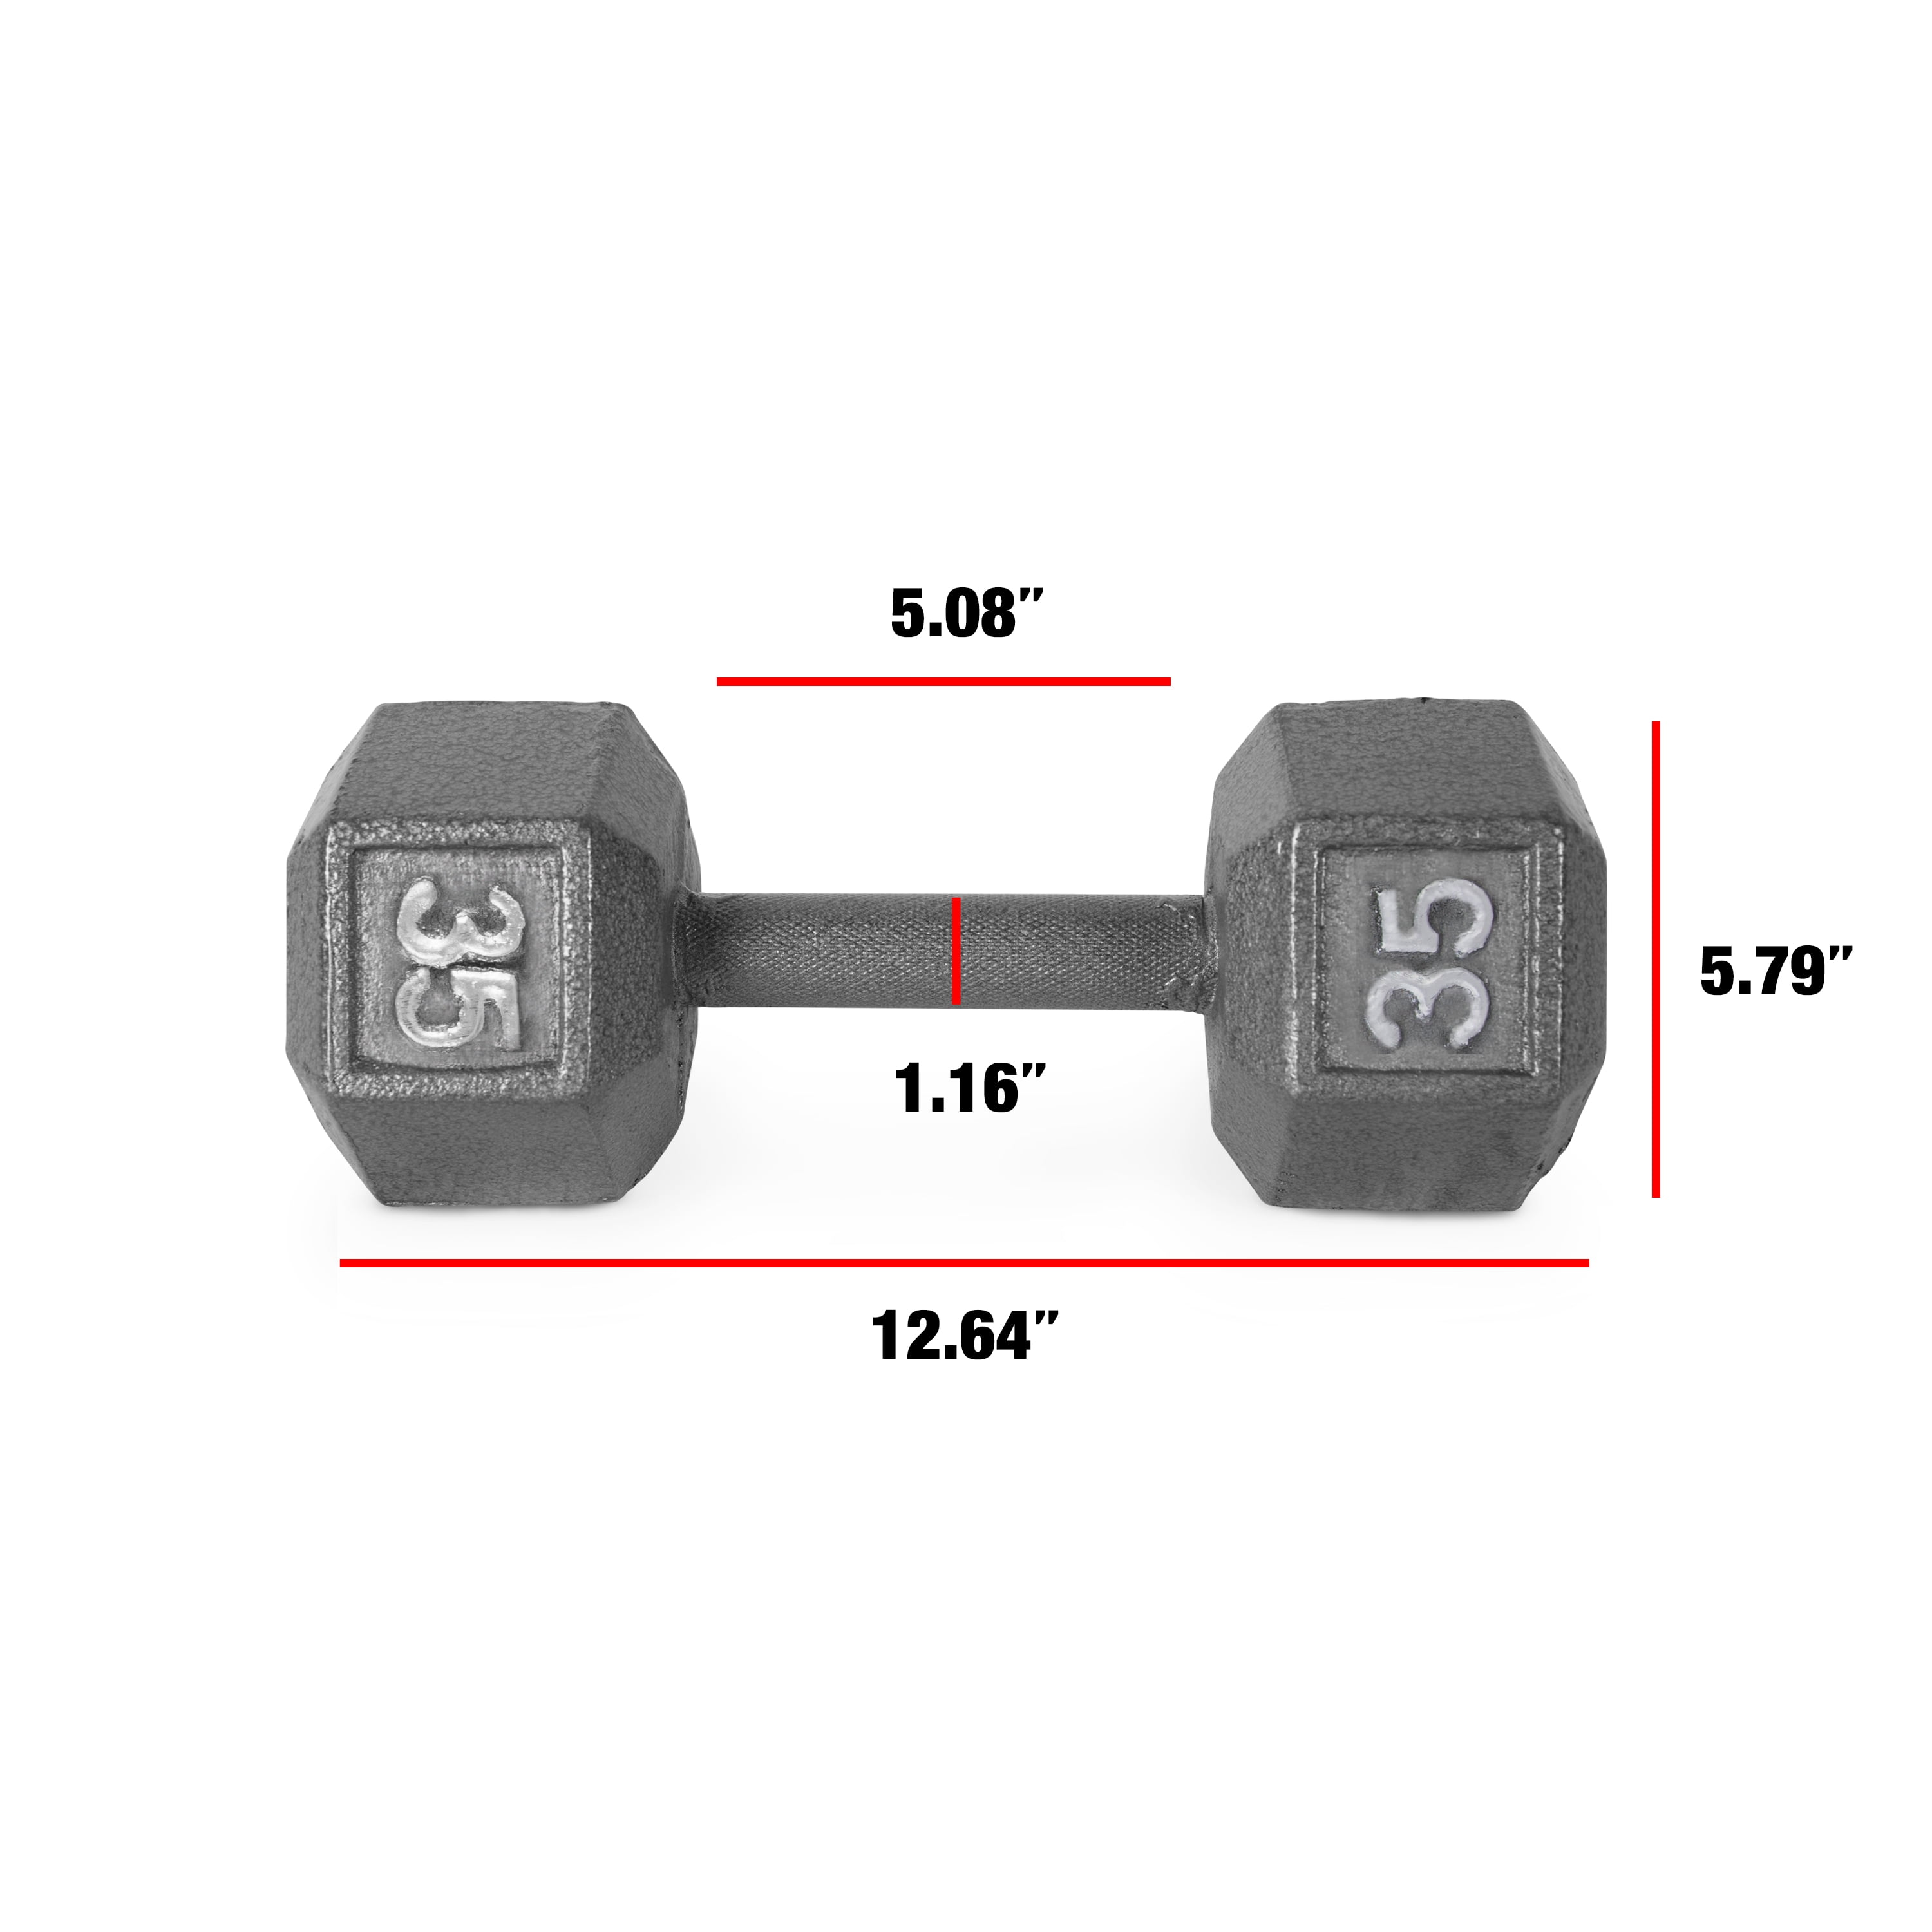 CAP Barbell Cast Iron Dumbbell Weights, 20 Lbs., Pair